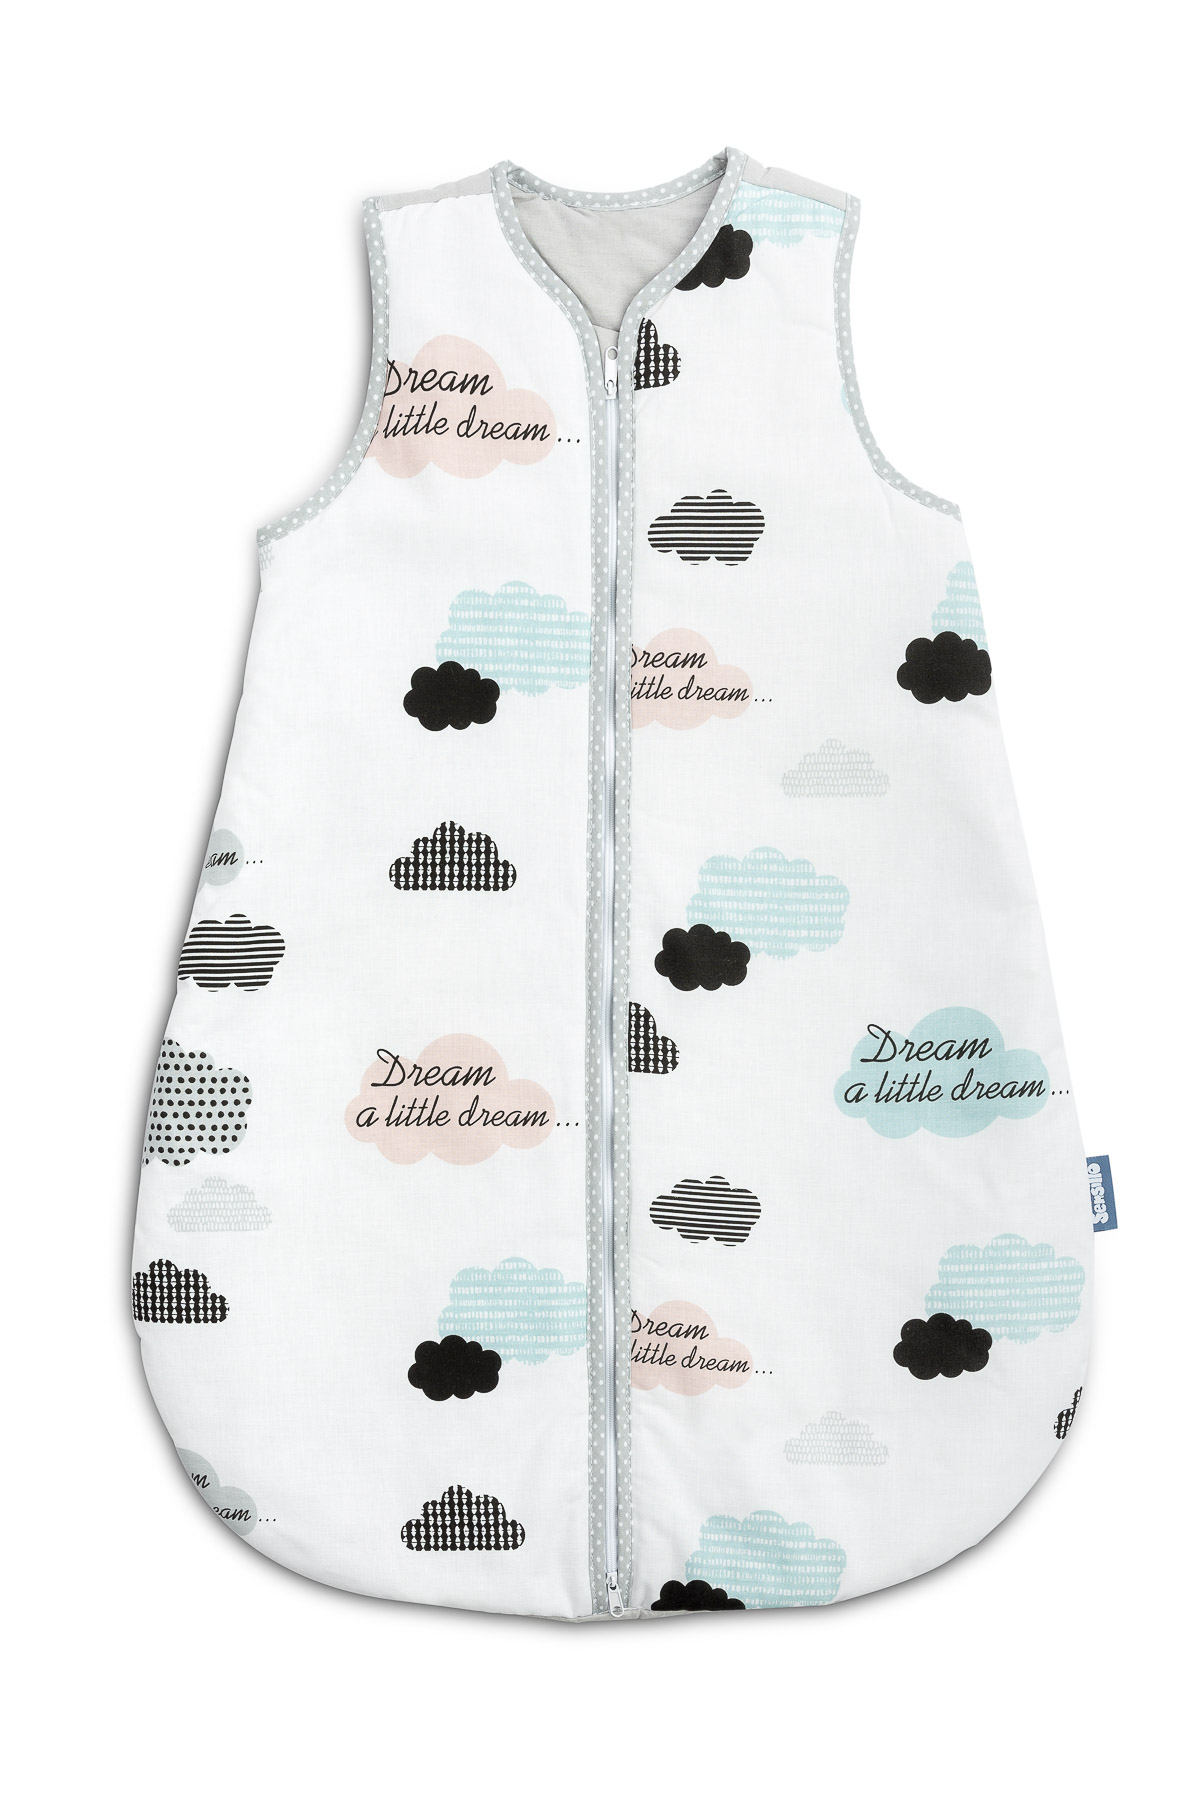 Sleeping bag size S – Clouds